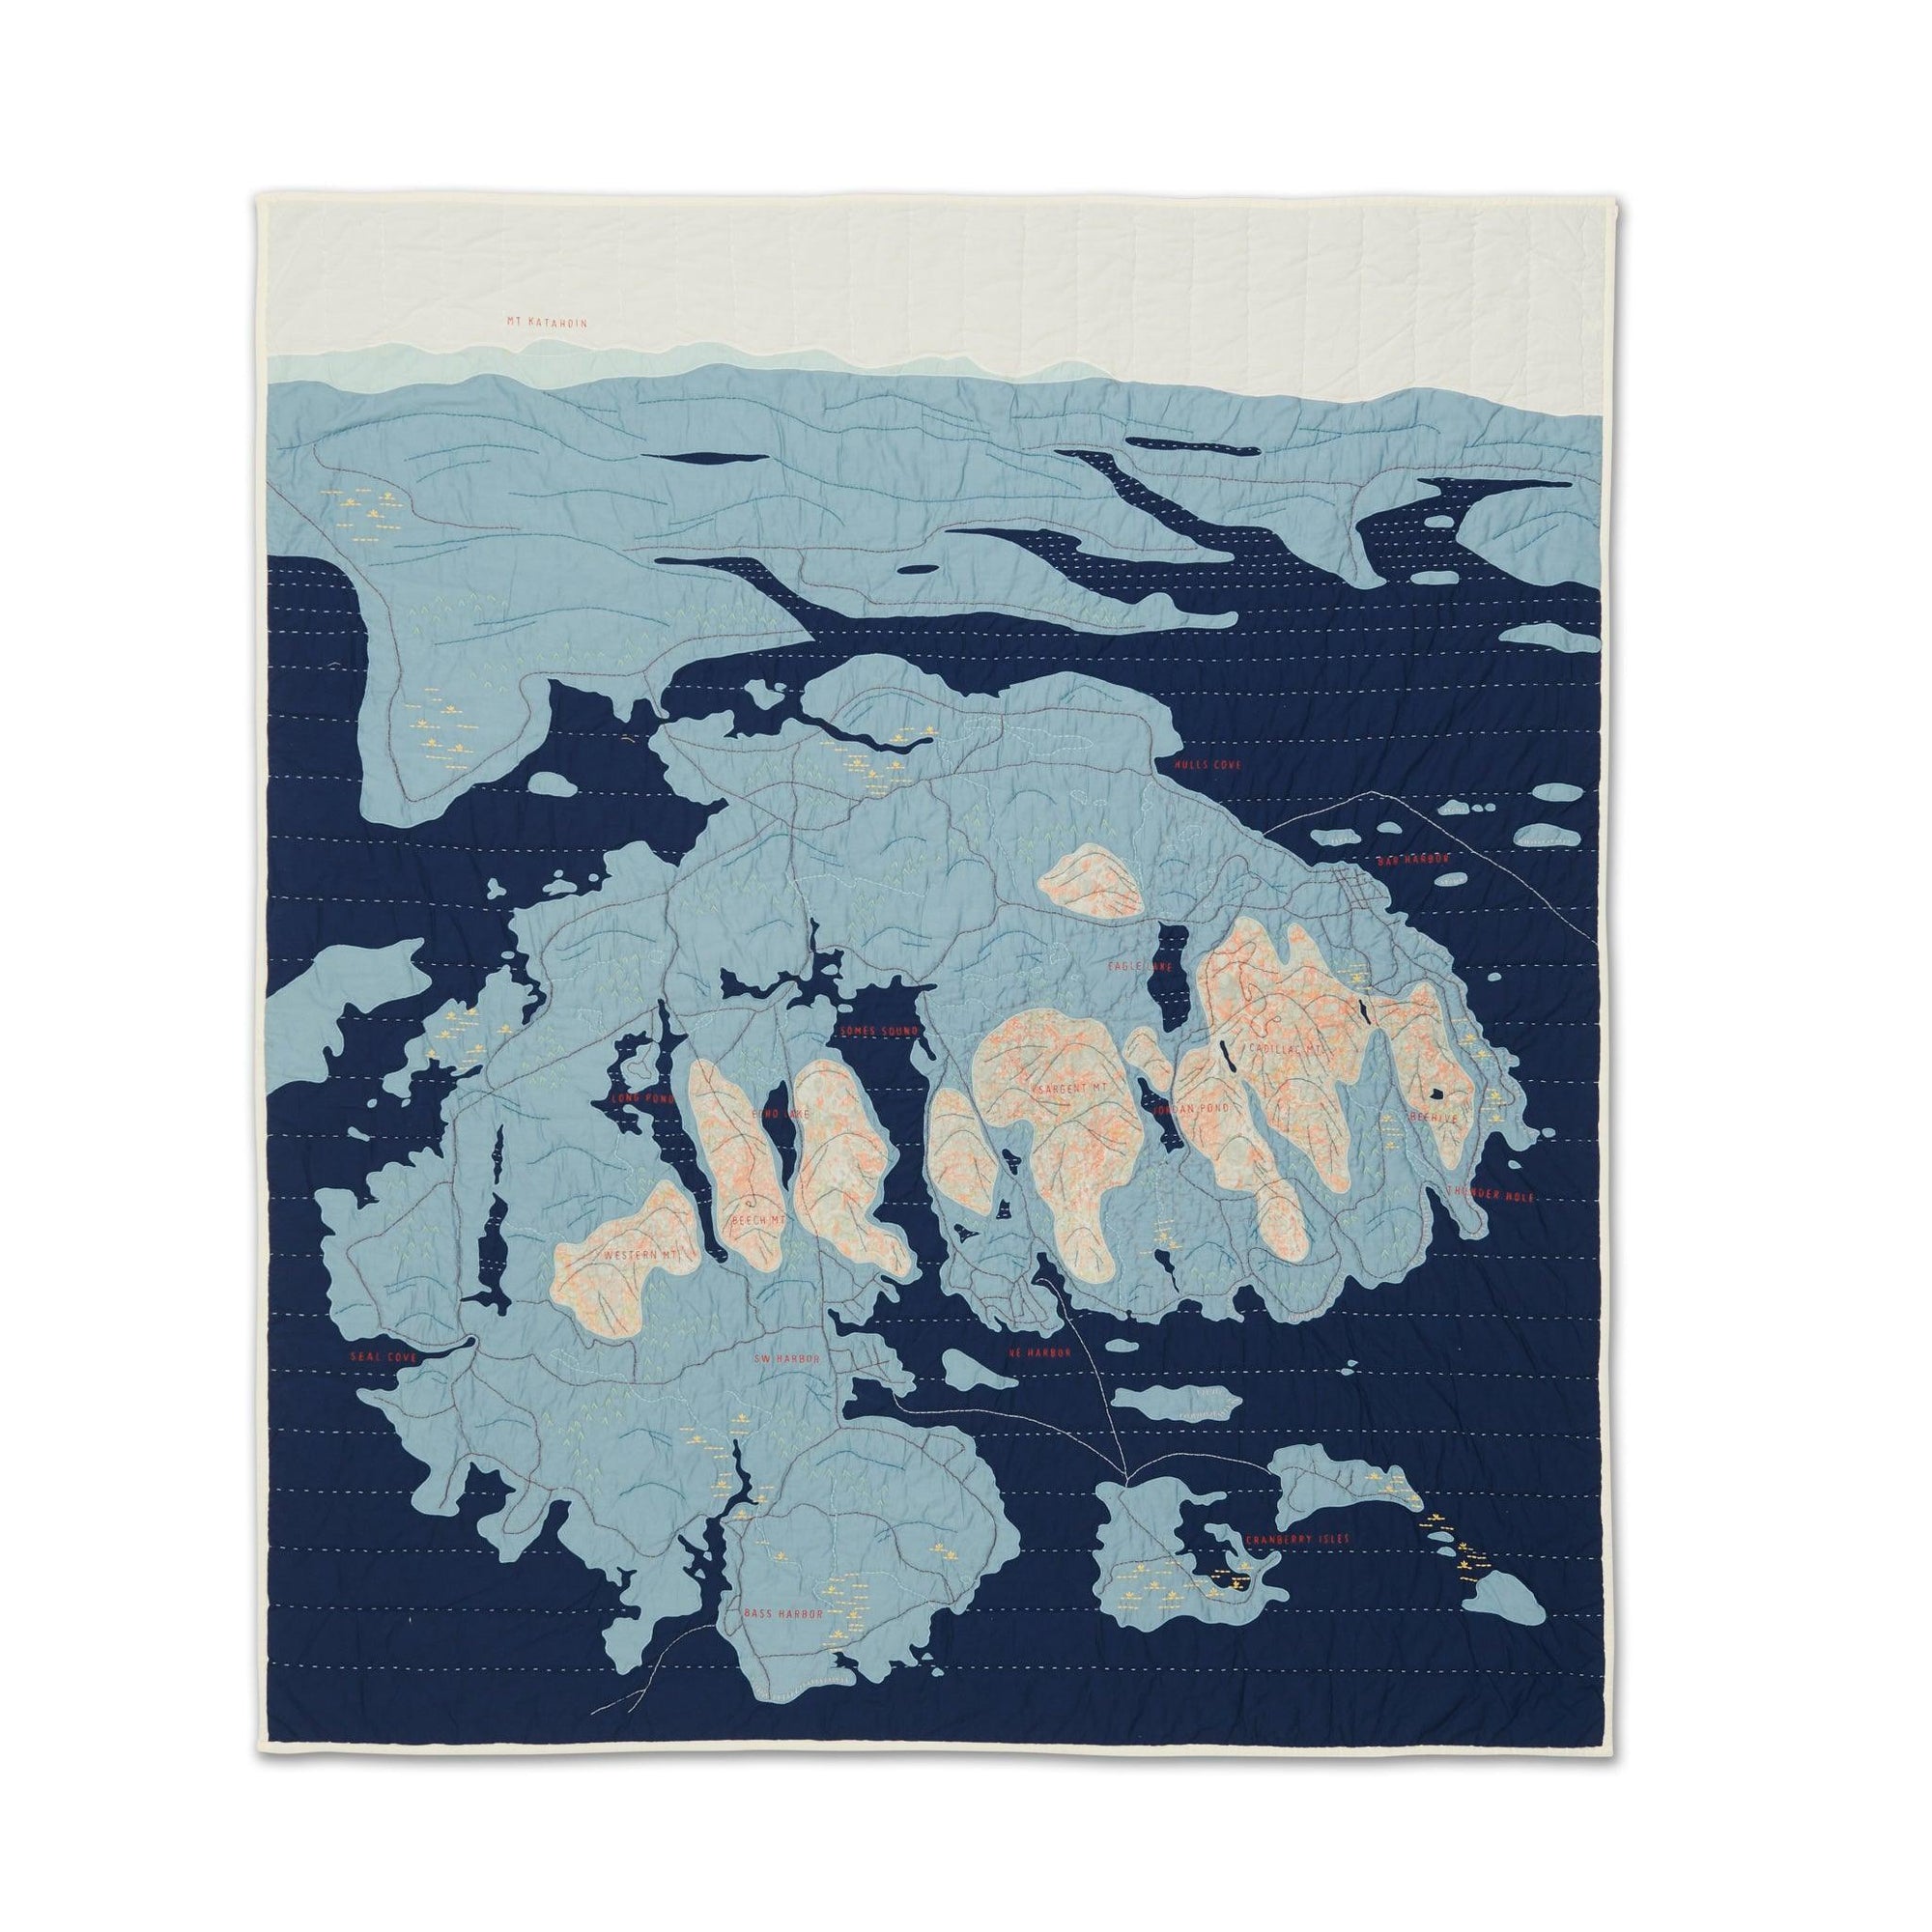 Acadia National Park Map Quilt by Haptic Lab with hand stitched embroidery detailing hiking trails, forests and the rocky shoreline of Maine.